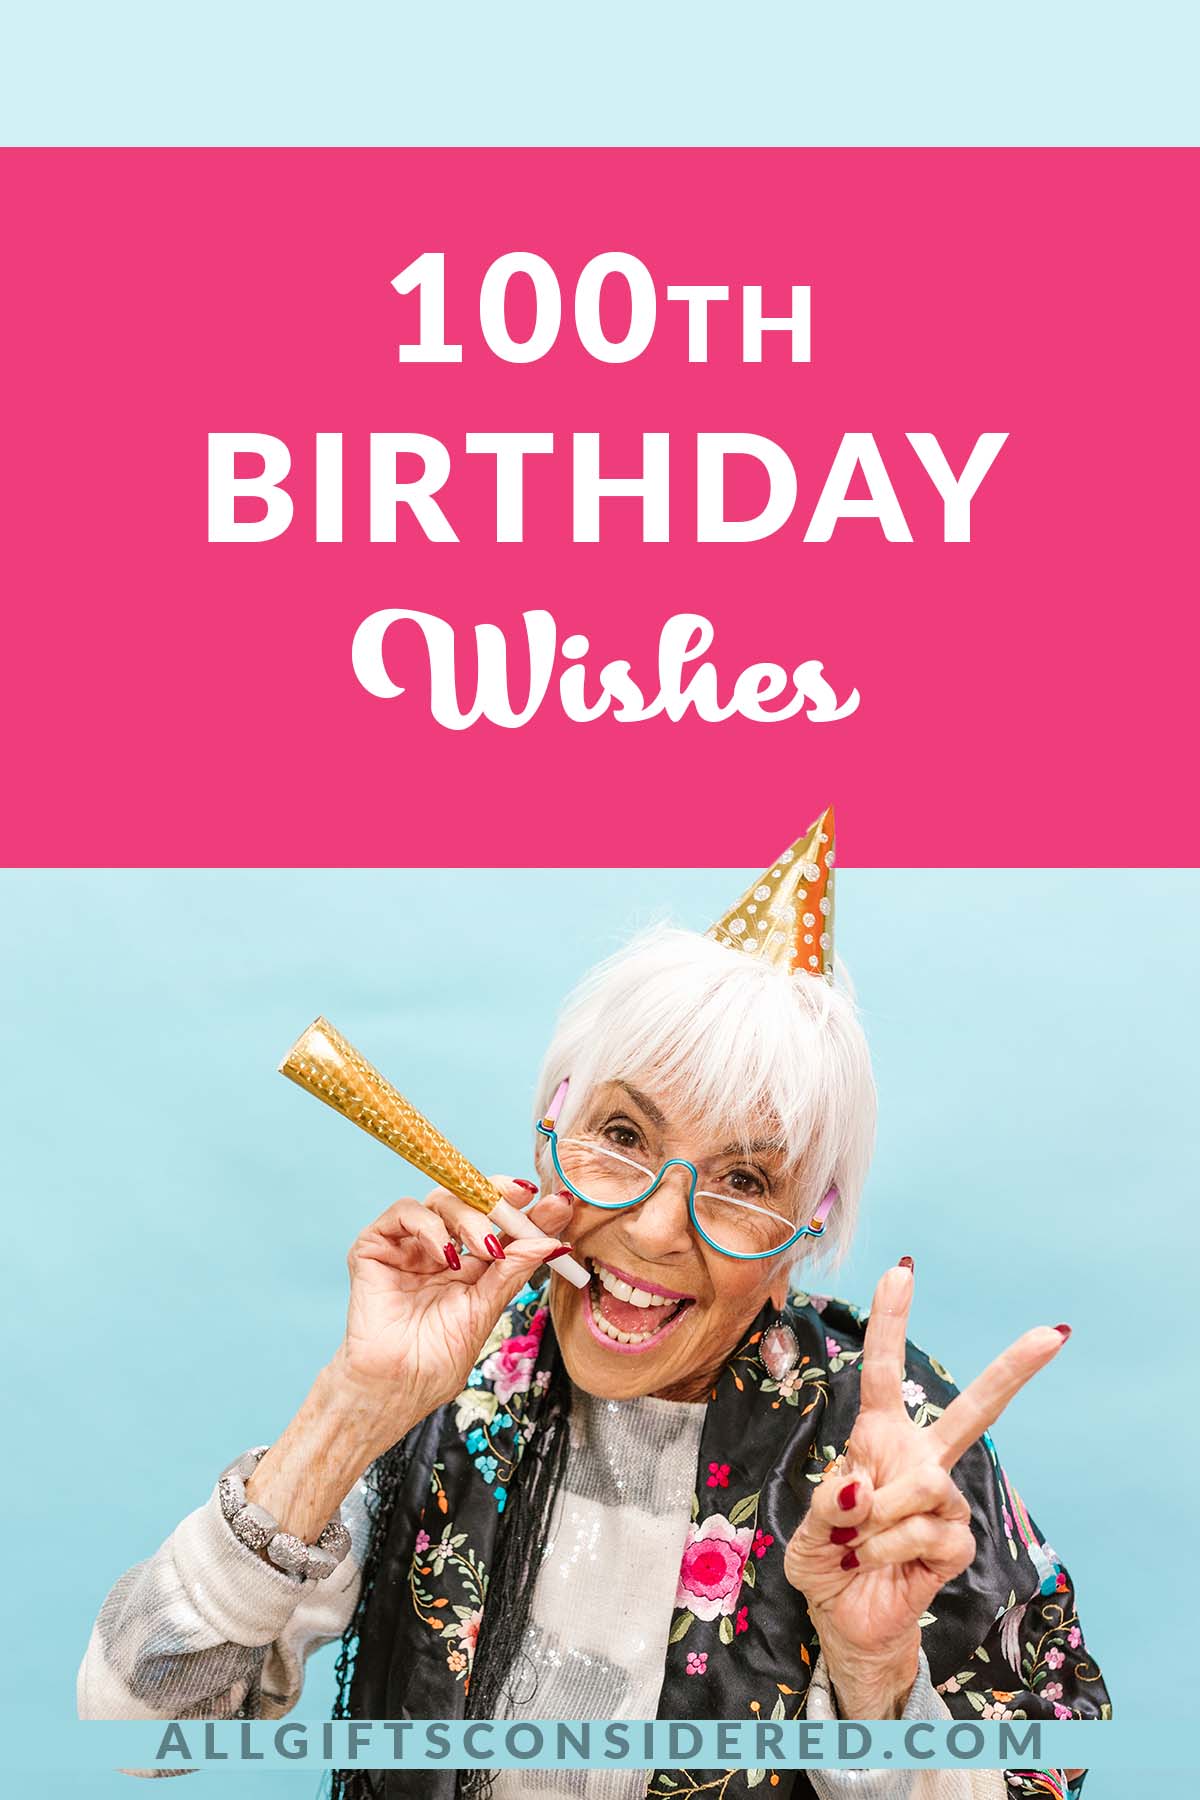 100 Best 100th Birthday Wishes » All Gifts Considered